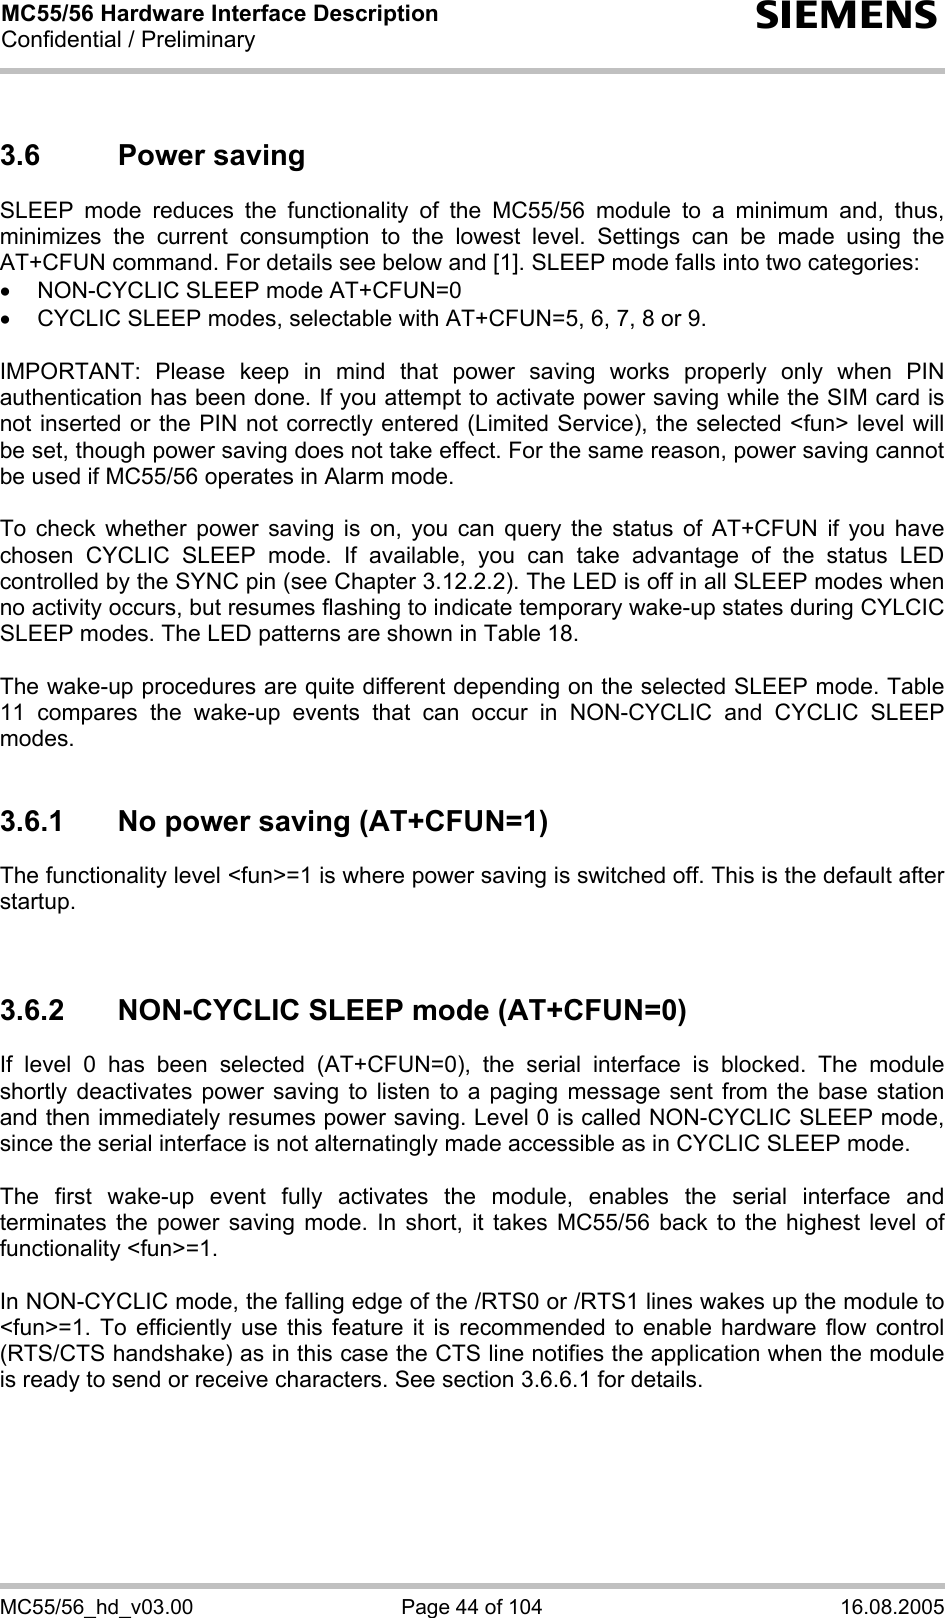 MC55/56 Hardware Interface Description Confidential / Preliminary s MC55/56_hd_v03.00  Page 44 of 104  16.08.2005 3.6 Power saving SLEEP mode reduces the functionality of the MC55/56 module to a minimum and, thus, minimizes the current consumption to the lowest level. Settings can be made using the AT+CFUN command. For details see below and [1]. SLEEP mode falls into two categories: •  NON-CYCLIC SLEEP mode AT+CFUN=0 •  CYCLIC SLEEP modes, selectable with AT+CFUN=5, 6, 7, 8 or 9.  IMPORTANT: Please keep in mind that power saving works properly only when PIN authentication has been done. If you attempt to activate power saving while the SIM card is not inserted or the PIN not correctly entered (Limited Service), the selected &lt;fun&gt; level will be set, though power saving does not take effect. For the same reason, power saving cannot be used if MC55/56 operates in Alarm mode.  To check whether power saving is on, you can query the status of AT+CFUN if you have chosen CYCLIC SLEEP mode. If available, you can take advantage of the status LED controlled by the SYNC pin (see Chapter 3.12.2.2). The LED is off in all SLEEP modes when no activity occurs, but resumes flashing to indicate temporary wake-up states during CYLCIC SLEEP modes. The LED patterns are shown in Table 18.   The wake-up procedures are quite different depending on the selected SLEEP mode. Table 11 compares the wake-up events that can occur in NON-CYCLIC and CYCLIC SLEEP modes.  3.6.1  No power saving (AT+CFUN=1) The functionality level &lt;fun&gt;=1 is where power saving is switched off. This is the default after startup.    3.6.2  NON-CYCLIC SLEEP mode (AT+CFUN=0) If level 0 has been selected (AT+CFUN=0), the serial interface is blocked. The module shortly deactivates power saving to listen to a paging message sent from the base station and then immediately resumes power saving. Level 0 is called NON-CYCLIC SLEEP mode, since the serial interface is not alternatingly made accessible as in CYCLIC SLEEP mode.  The first wake-up event fully activates the module, enables the serial interface and terminates the power saving mode. In short, it takes MC55/56 back to the highest level of functionality &lt;fun&gt;=1.   In NON-CYCLIC mode, the falling edge of the /RTS0 or /RTS1 lines wakes up the module to &lt;fun&gt;=1. To efficiently use this feature it is recommended to enable hardware flow control (RTS/CTS handshake) as in this case the CTS line notifies the application when the module is ready to send or receive characters. See section 3.6.6.1 for details.   